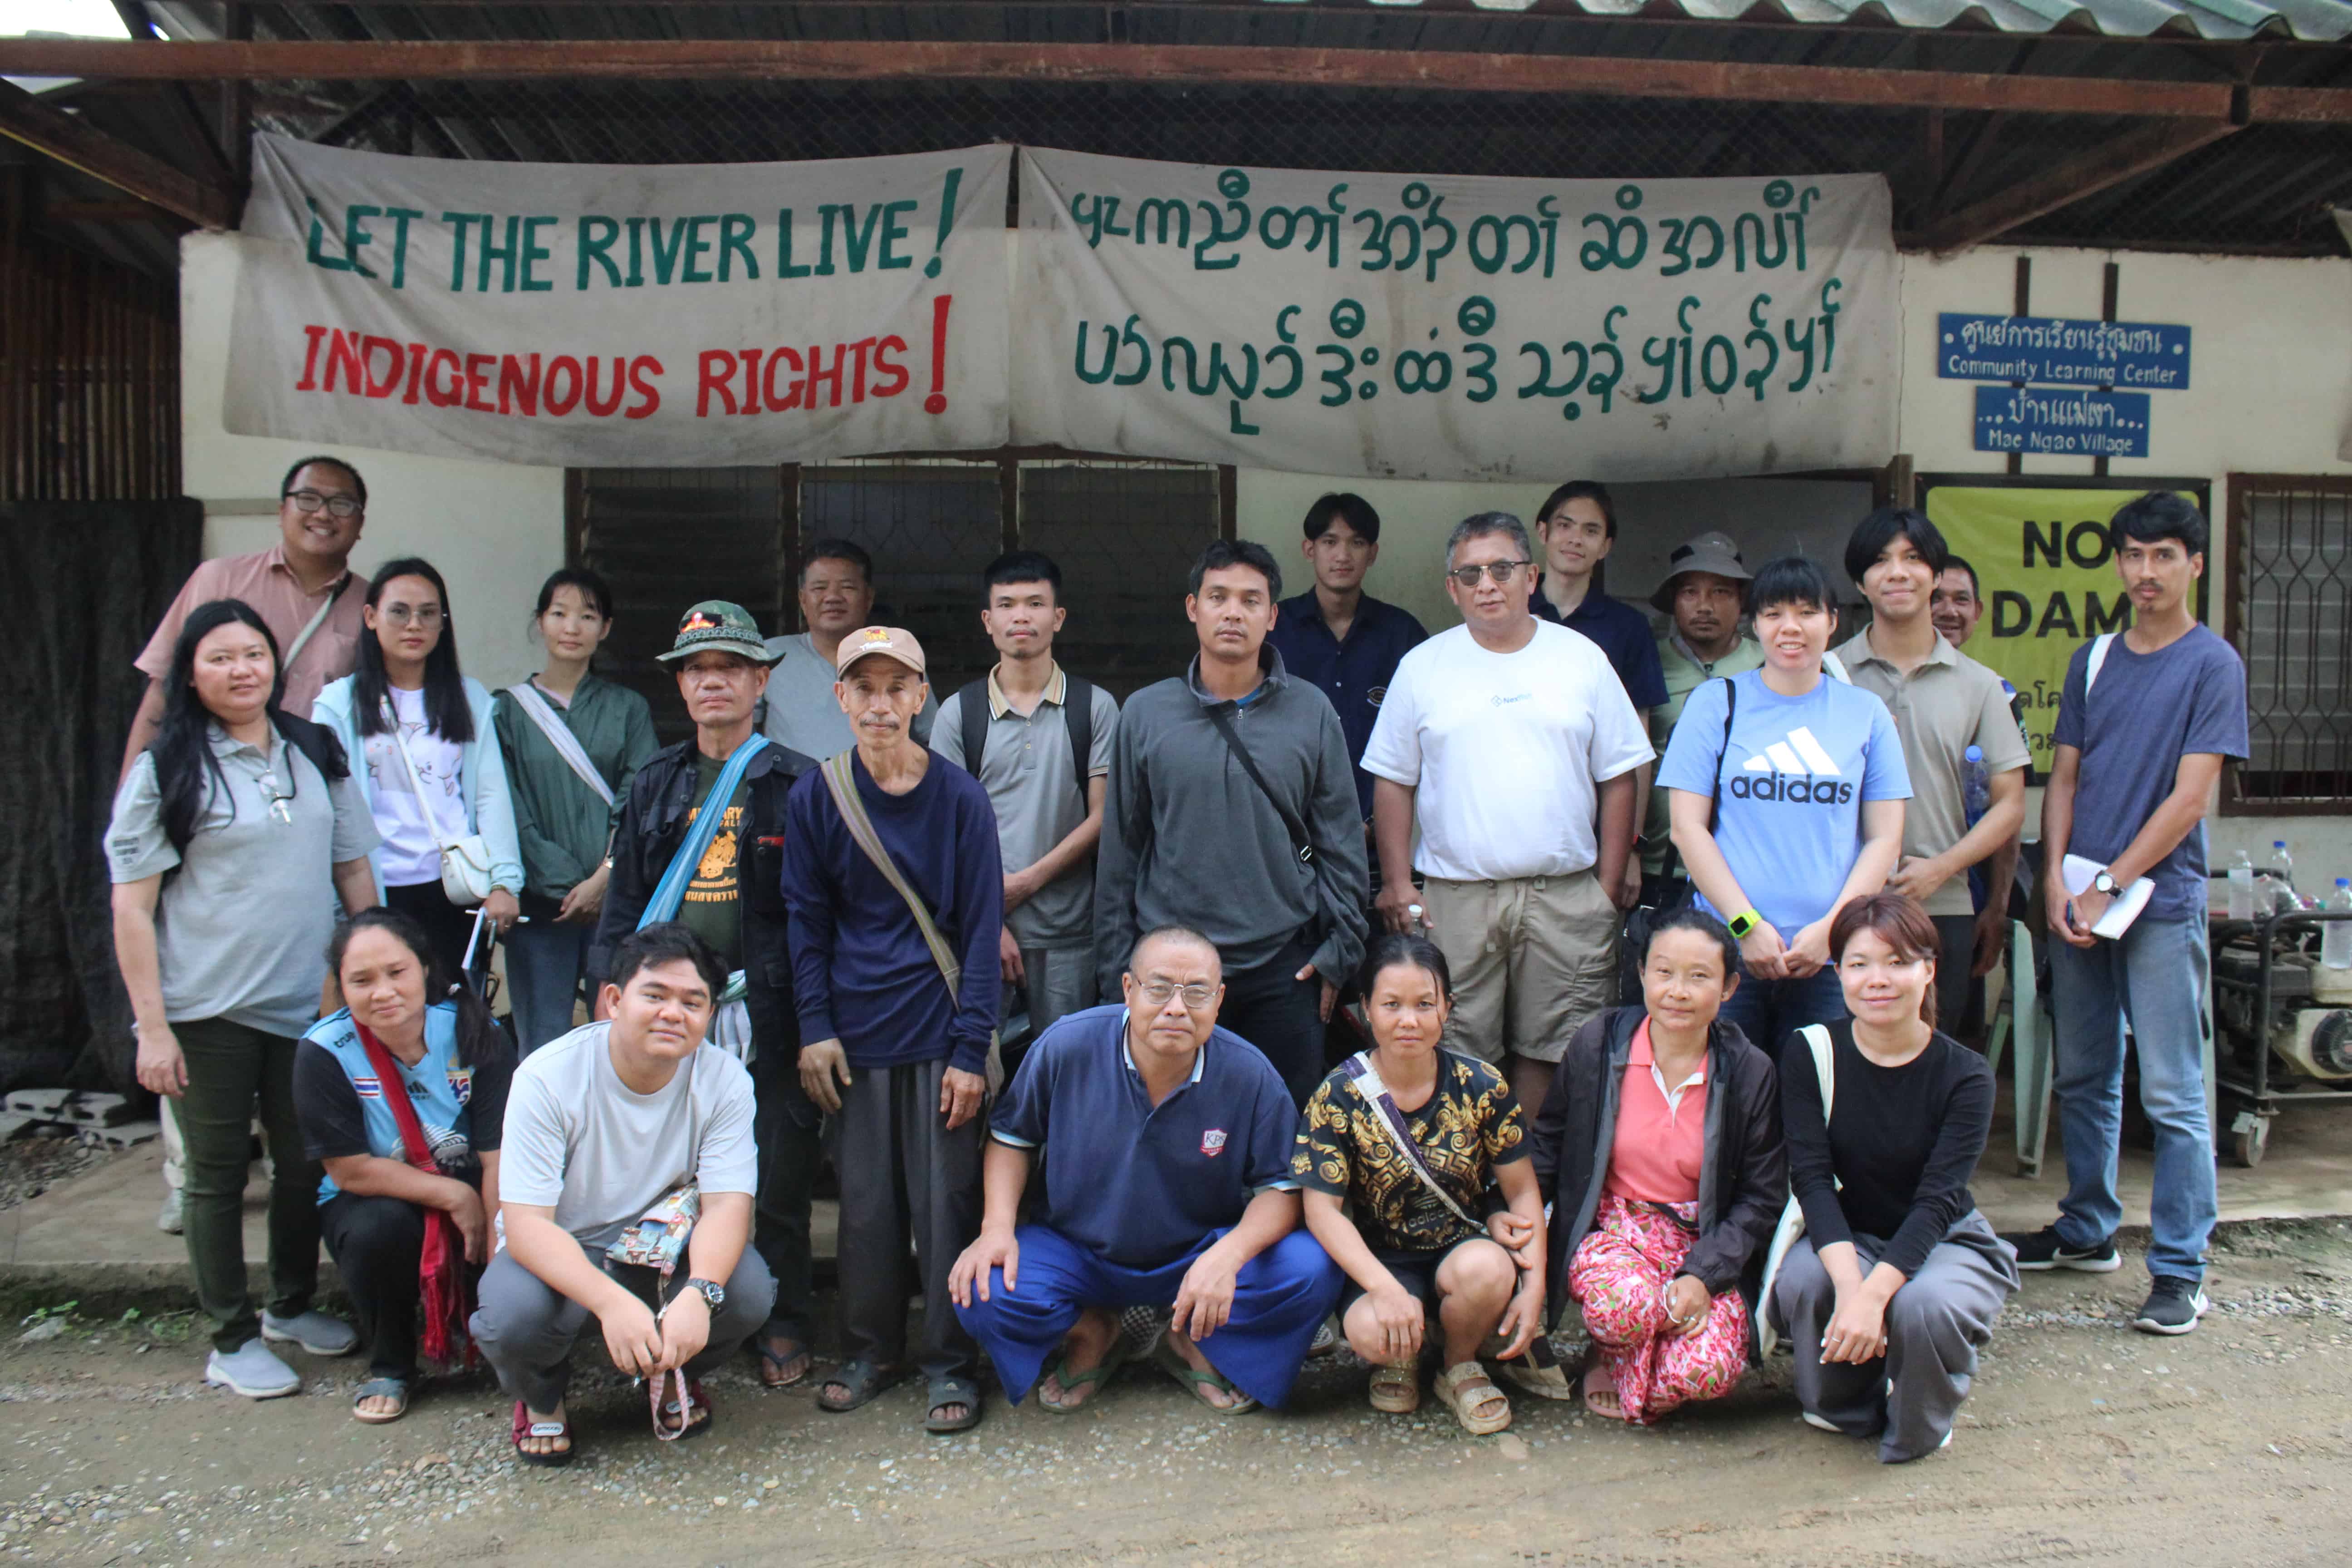 Group of participants standin in front of "Let the river live" sign